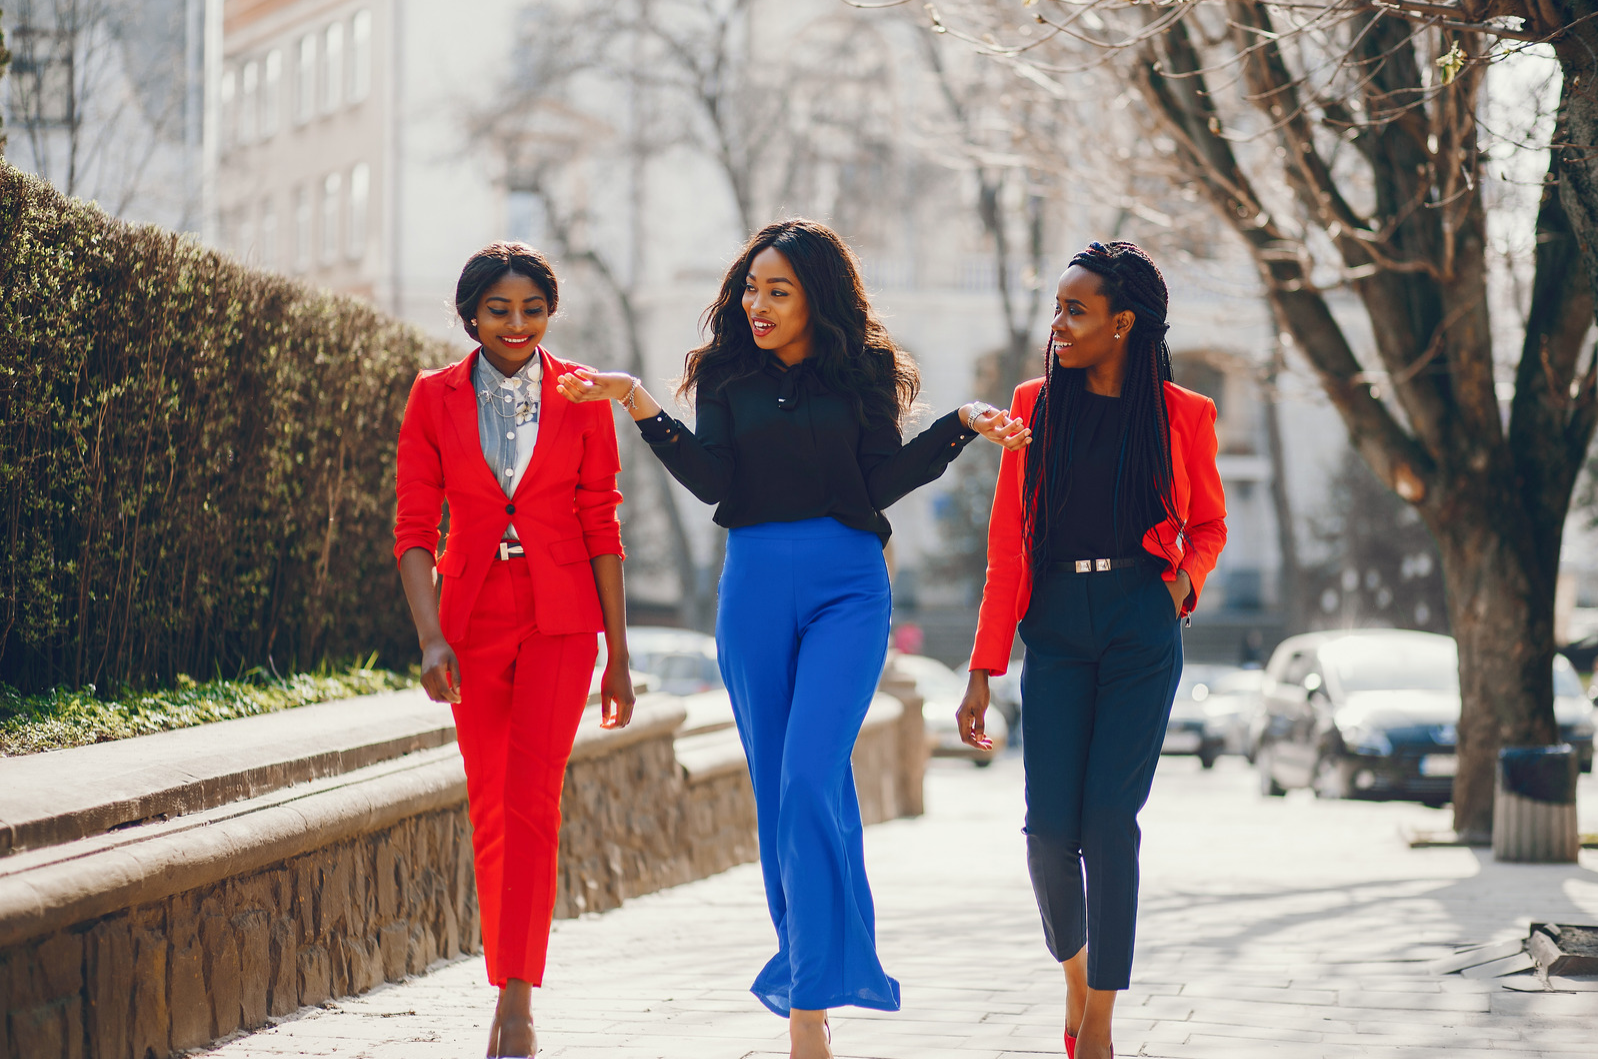 Three women of color are walking on a sidewalk. On the far left is a woman in a red suit with her hair pulled back, center is a woman in a black blouse and cobalt blue pants gesturing with her hands, on the right is a woman dressed in all black with a red blazer; her hair is braided and pulled back.